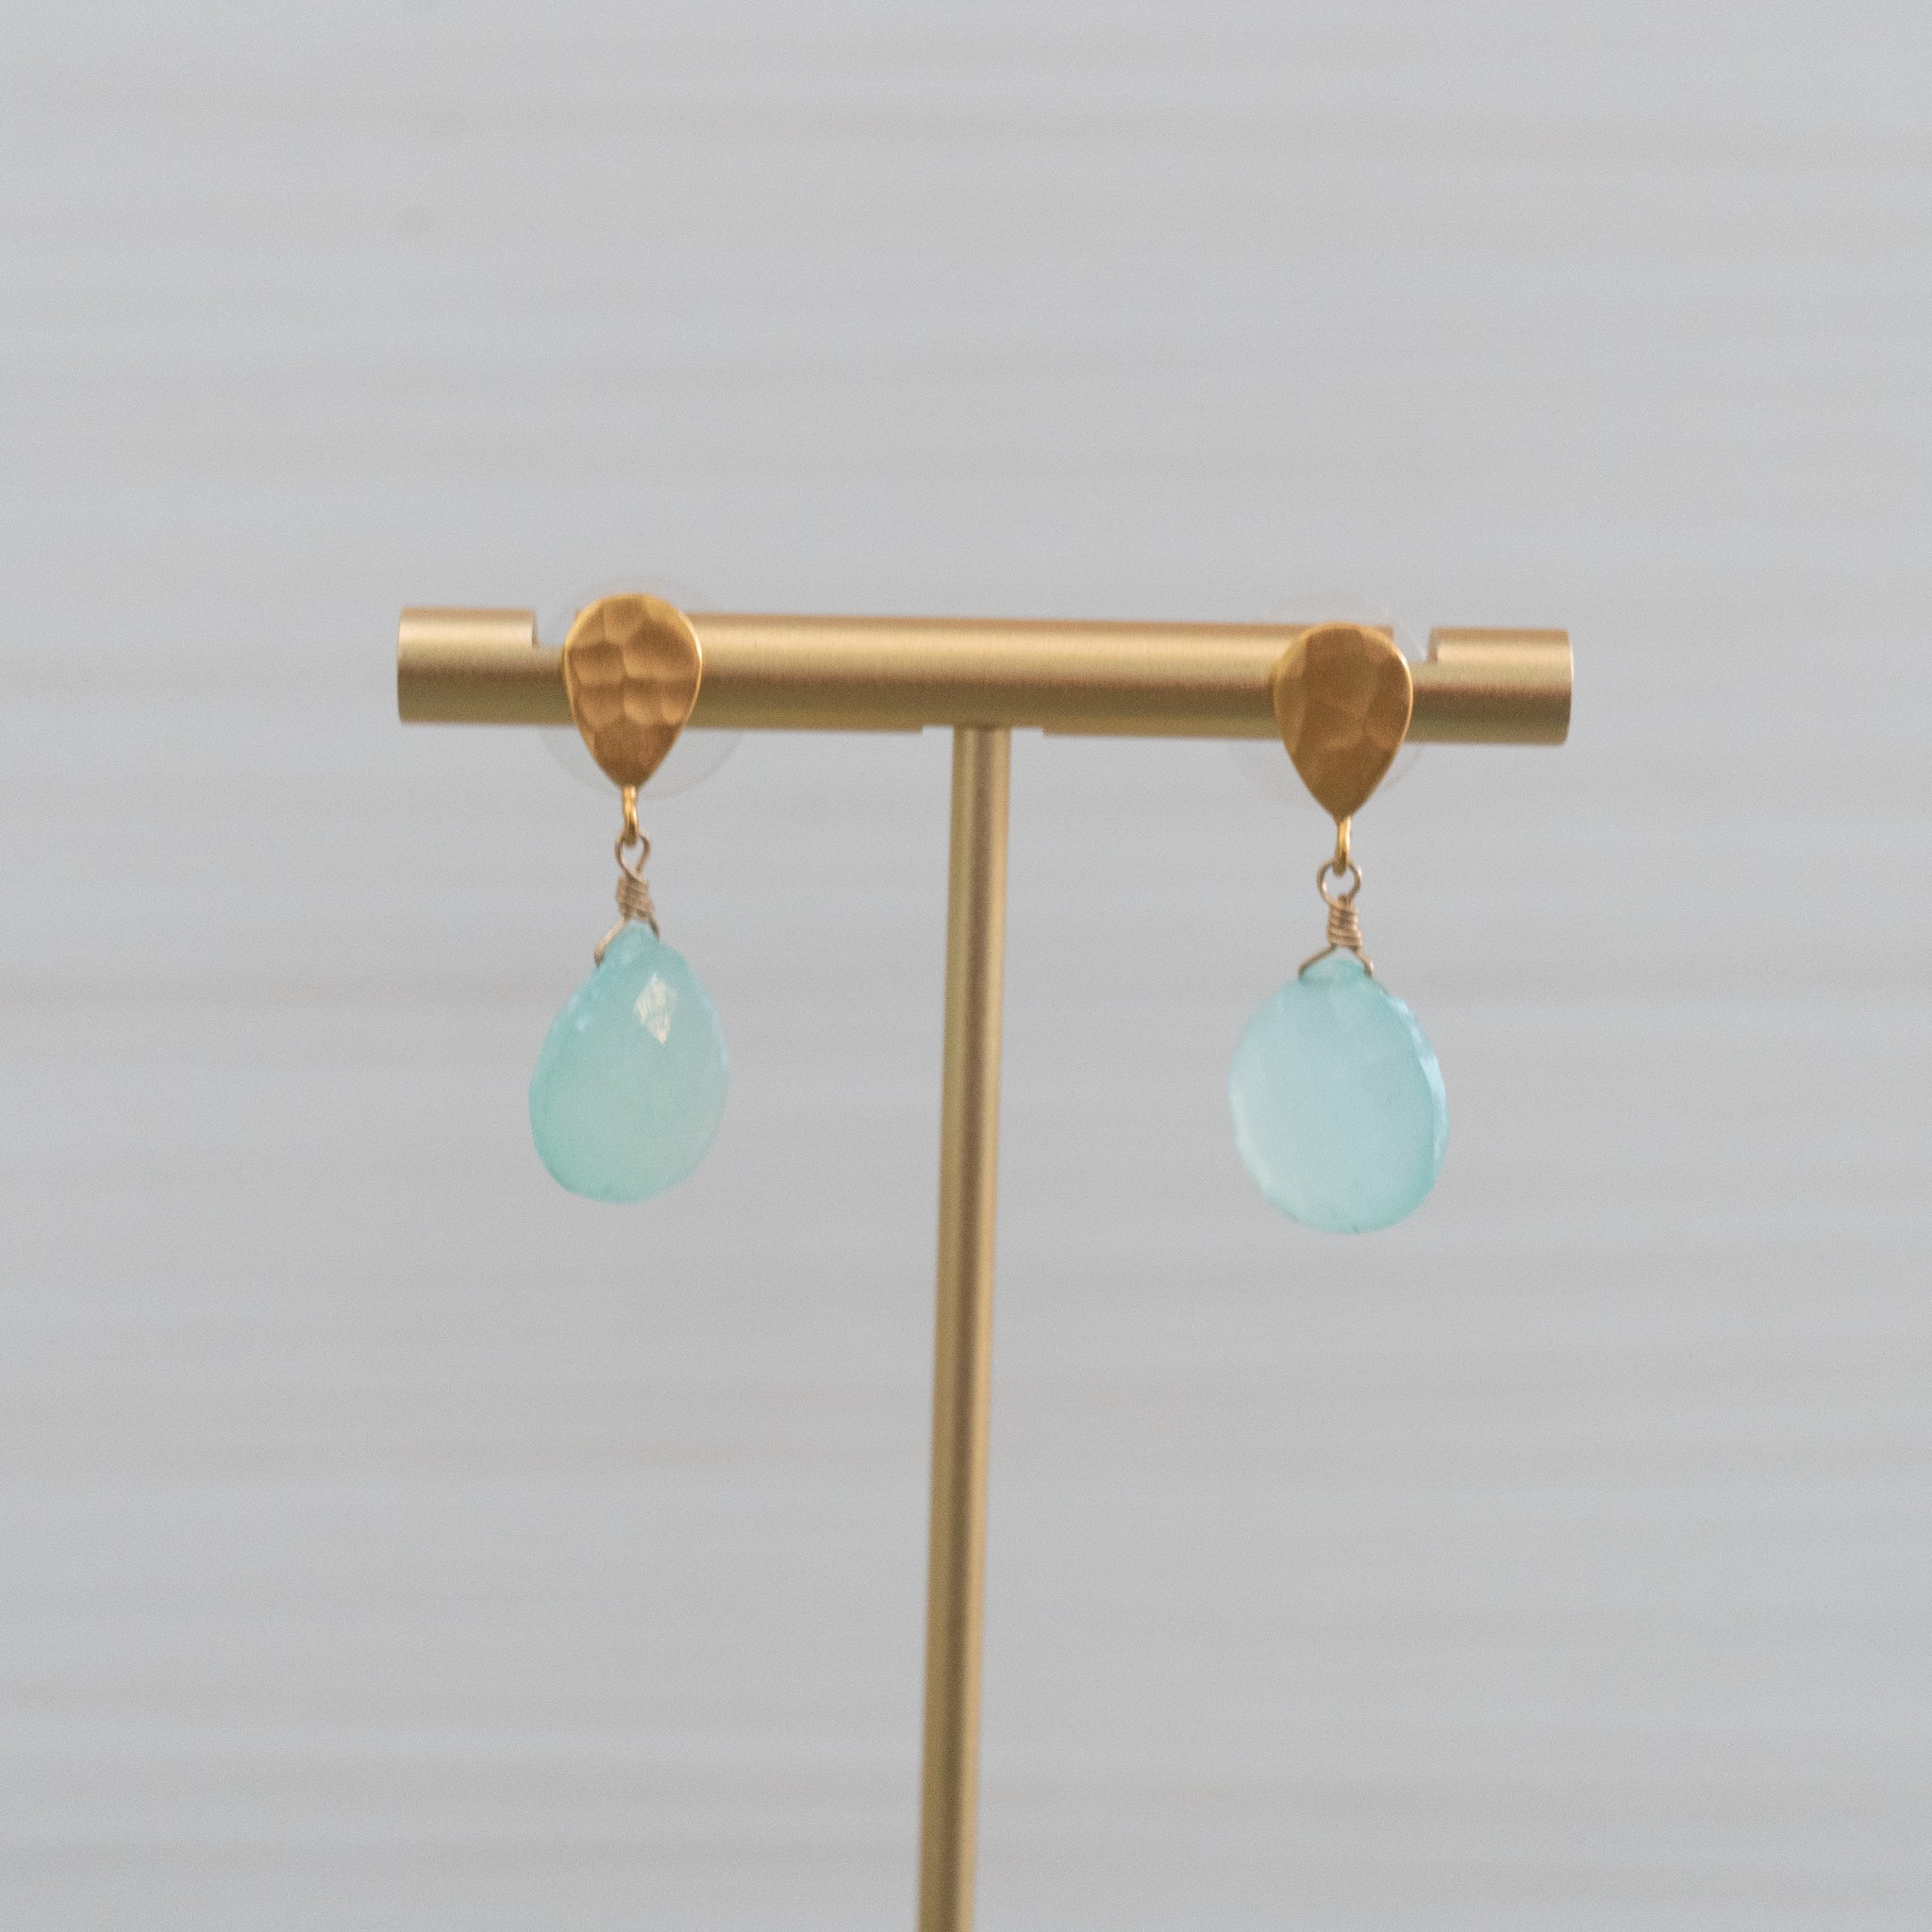 matte gold hammered stud earrings with large blue gemstones handmade in Hawaii by eve black jewelry